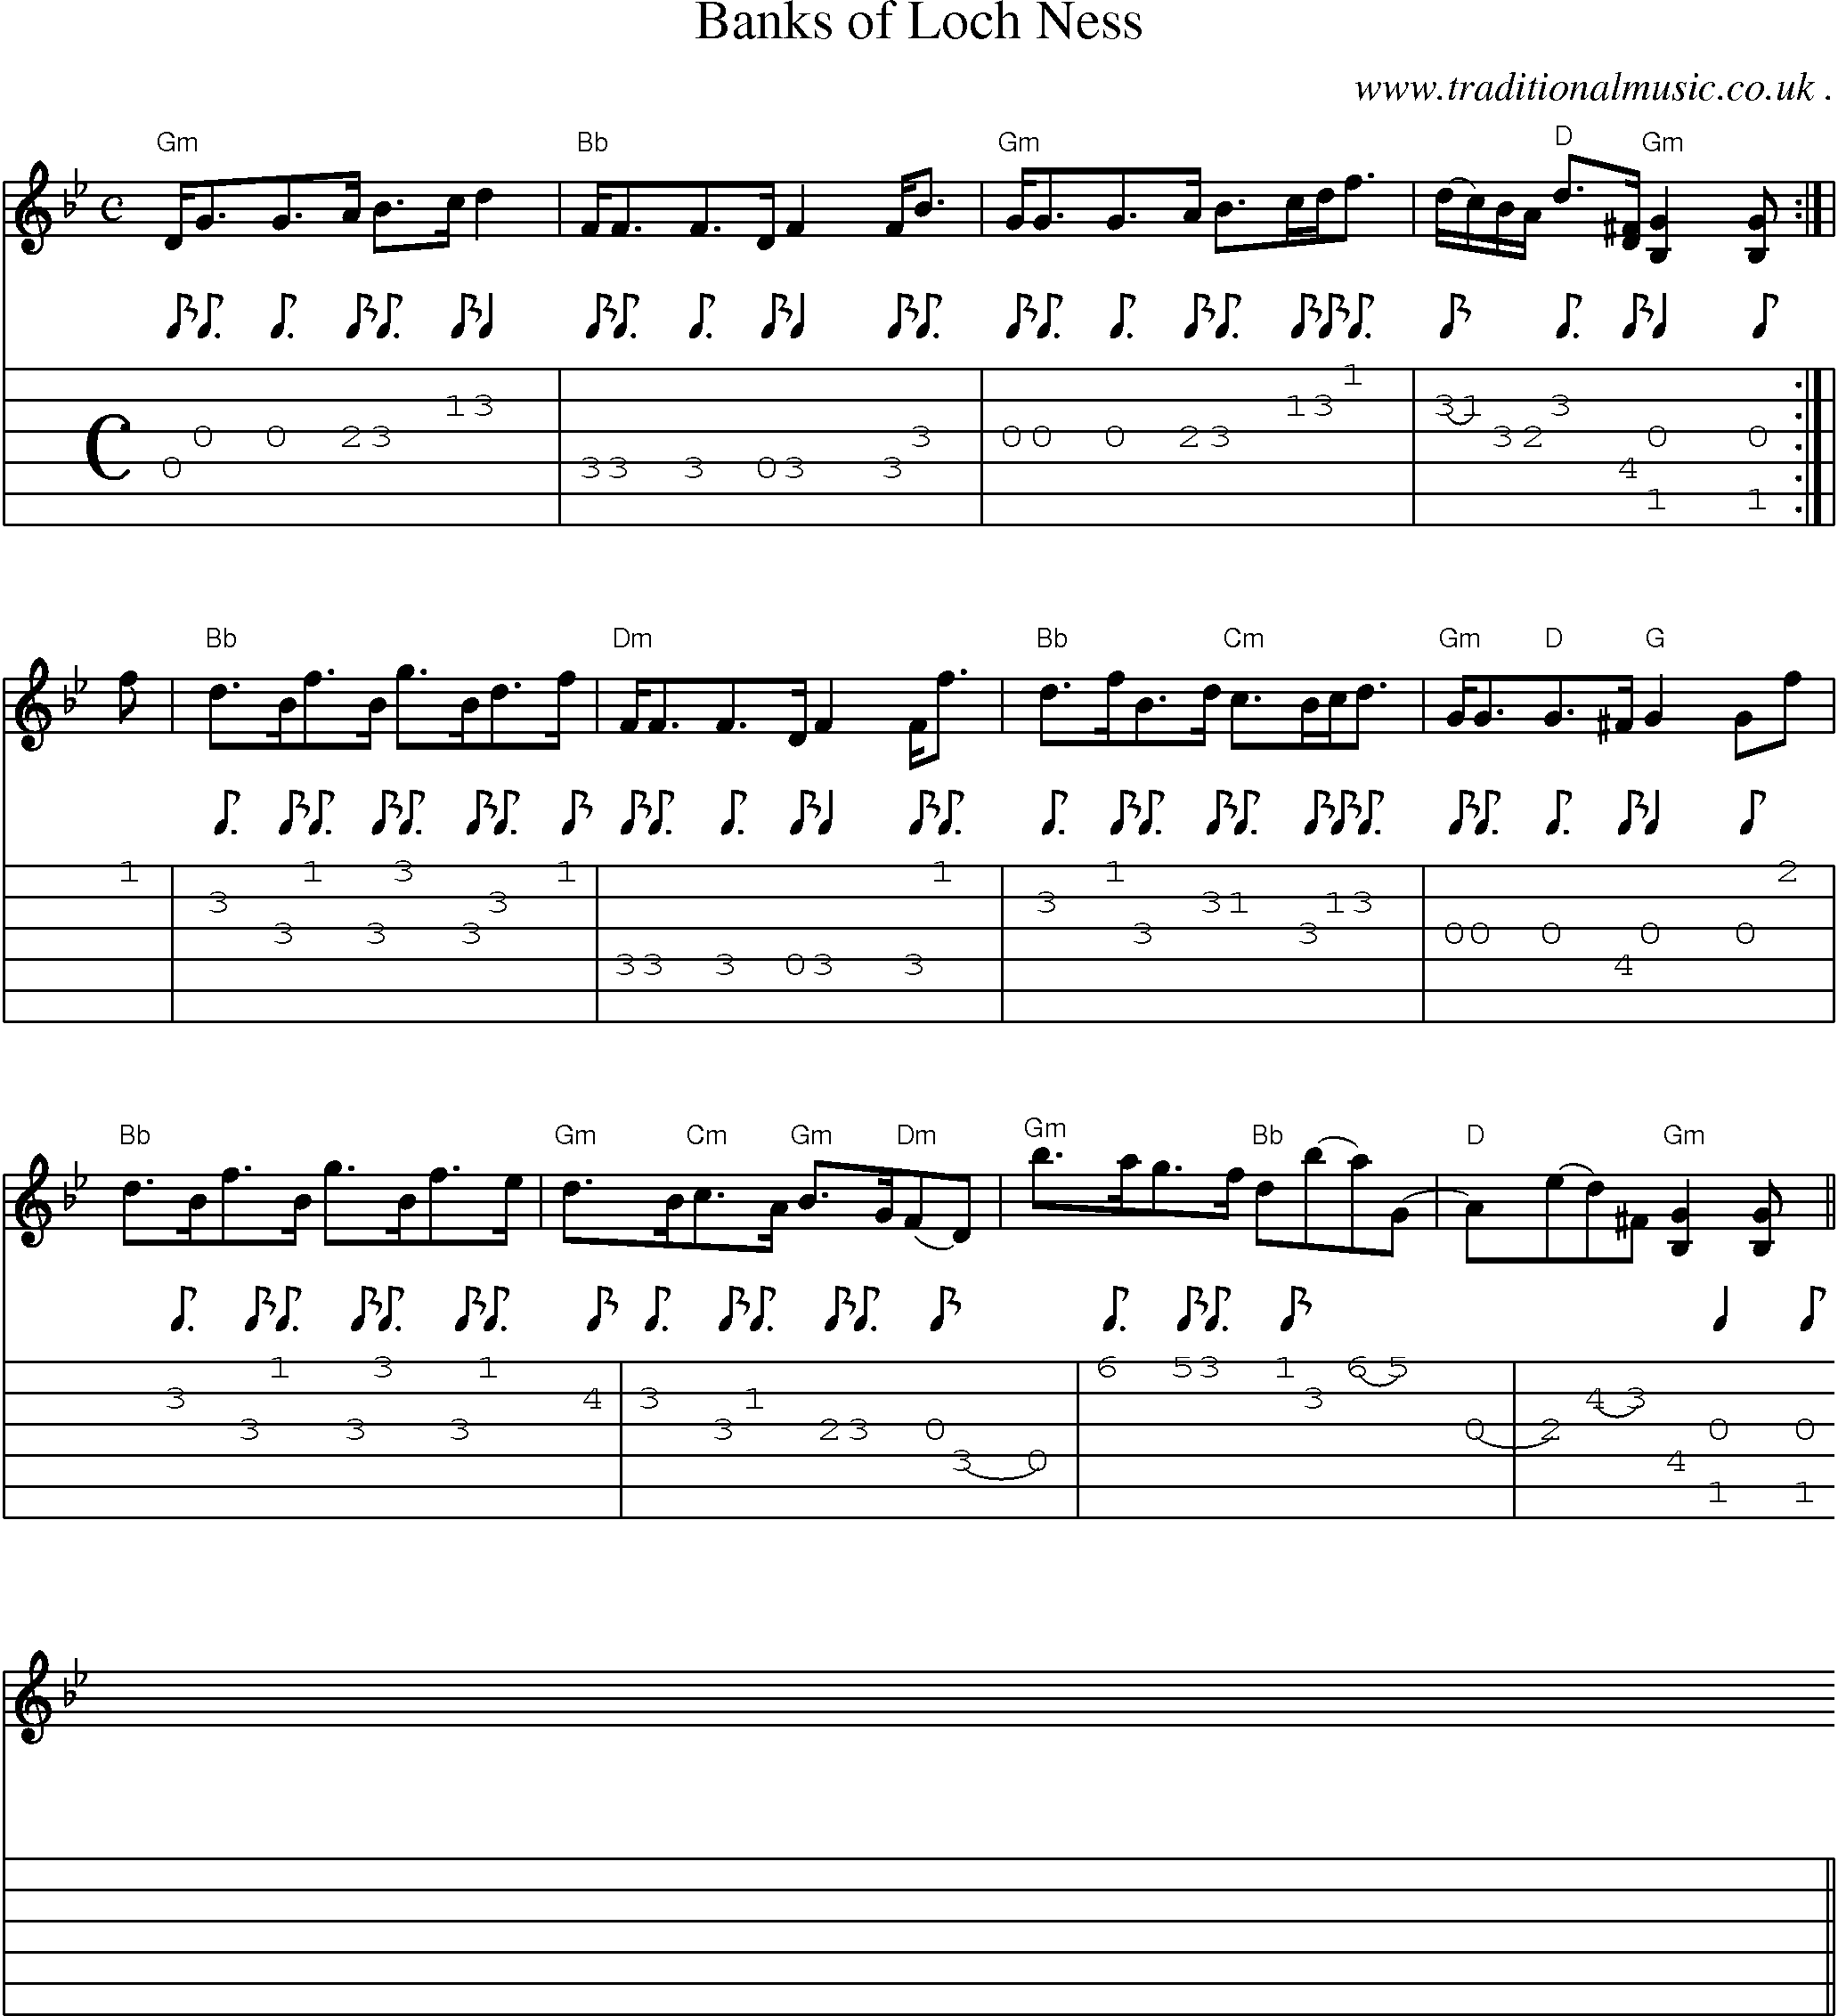 Sheet-music  score, Chords and Guitar Tabs for Banks Of Loch Ness